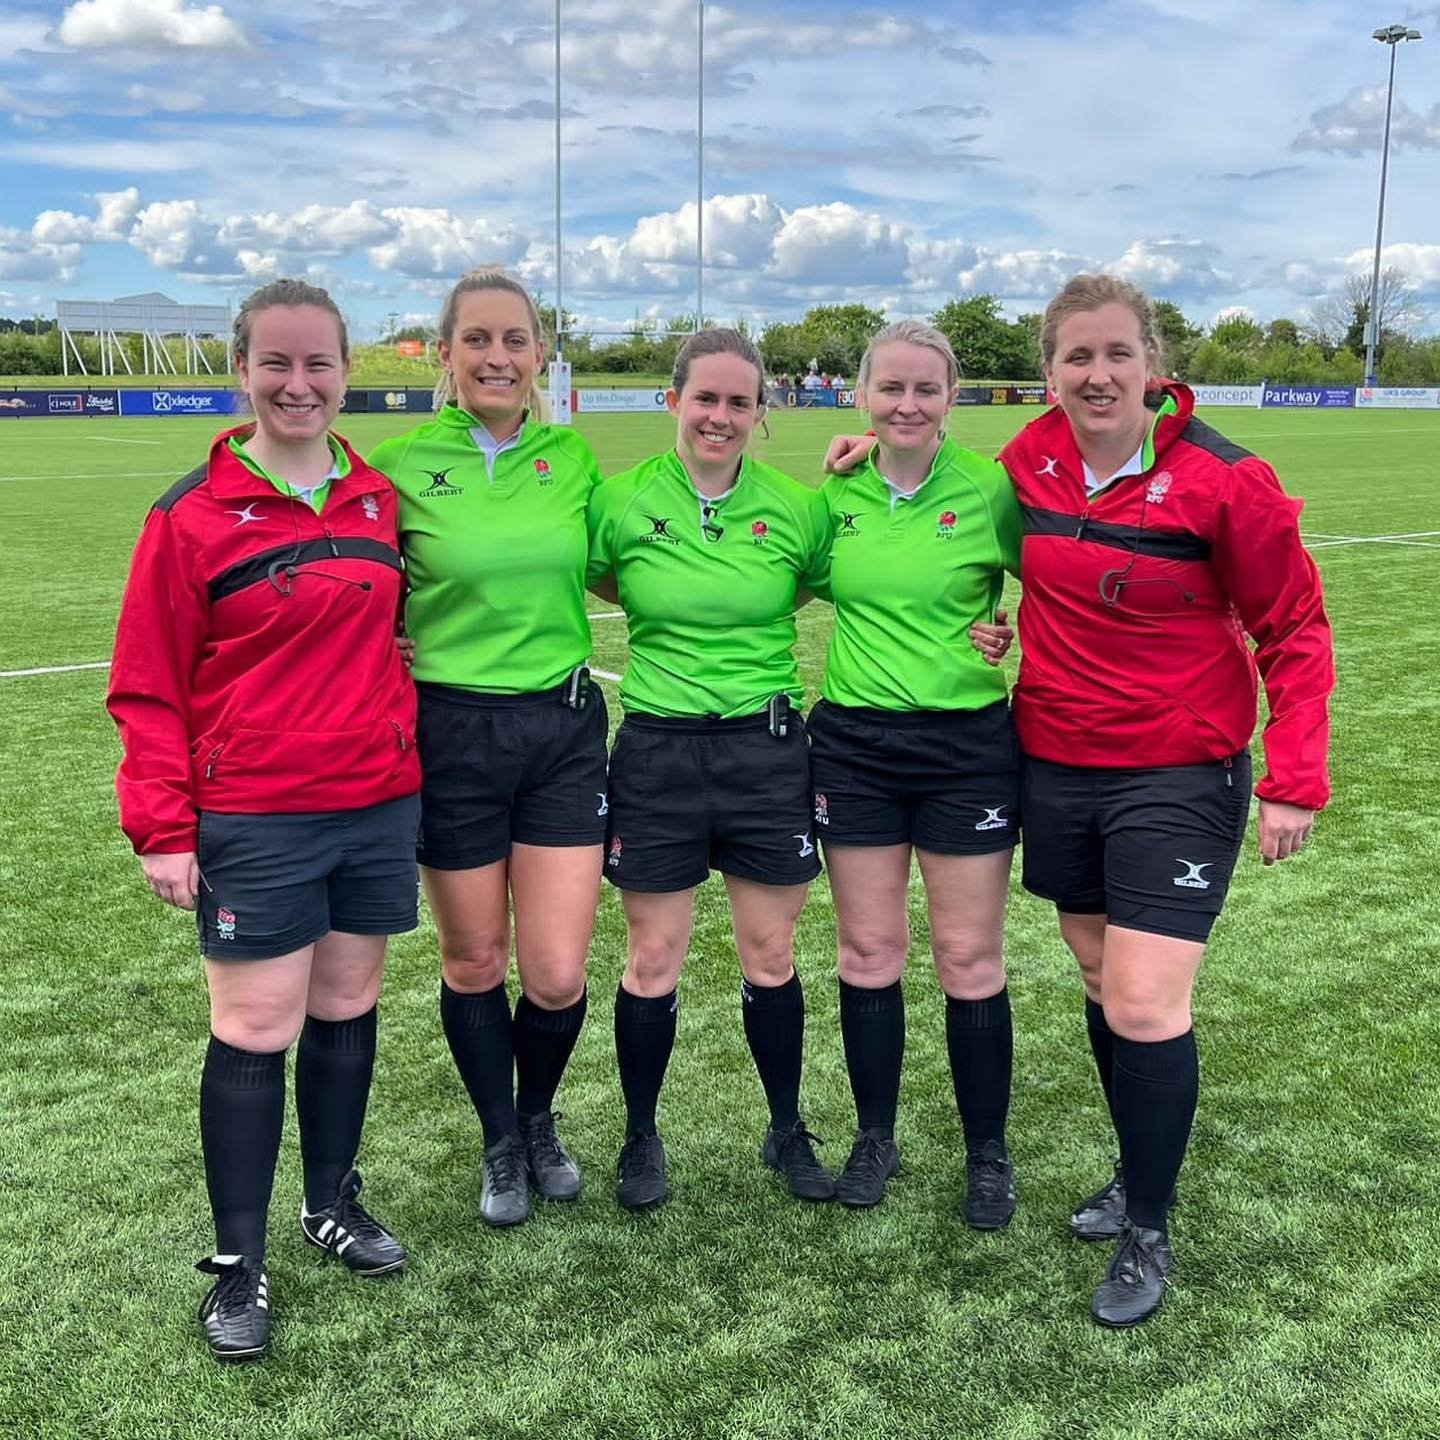 #LSRFUR West Referees Melissa Wright and Kasey Allen appointed as Referee and AR1 respectively for the U20 England Women&rsquo;s V Wales Women friendly game last Saturday. A great game oversaw by a brilliant team of FMOs in the sunshine 😎

Congratul